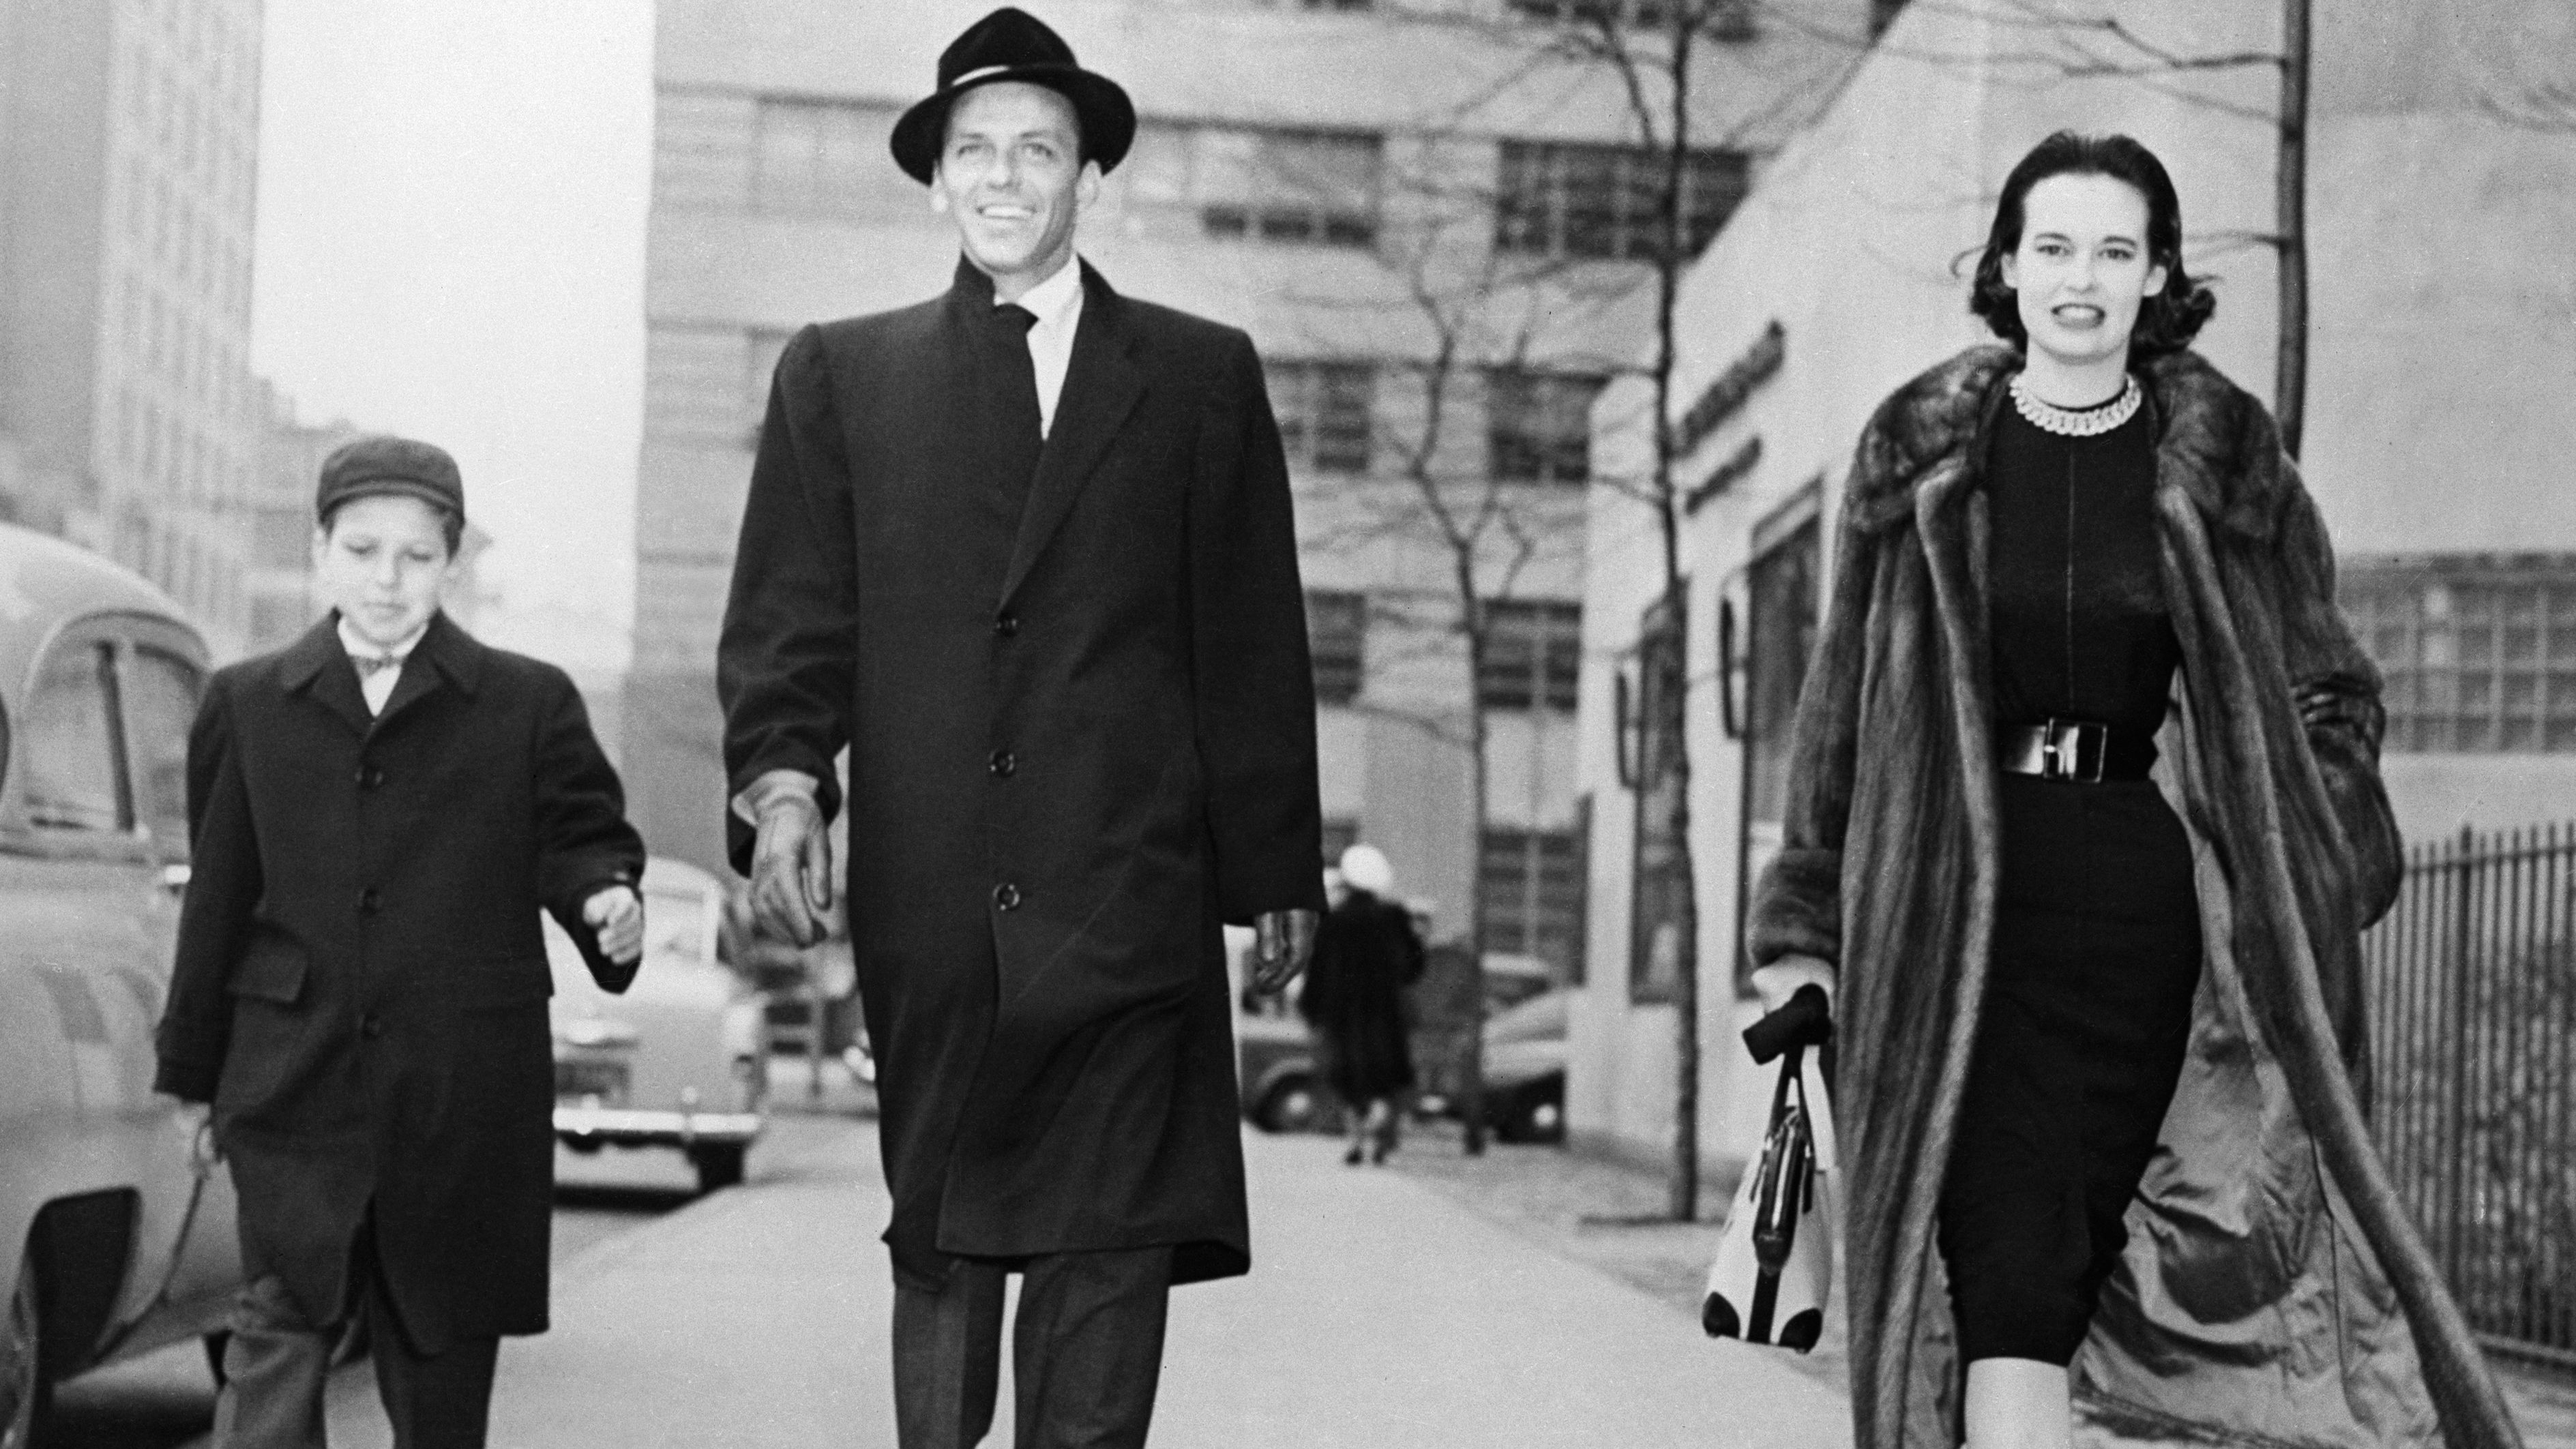 Vanderbilt strolls with Frank Sinatra and Frank Sinatra Jr. The previous night, she had attended a New York stage premiere with Sinatra.